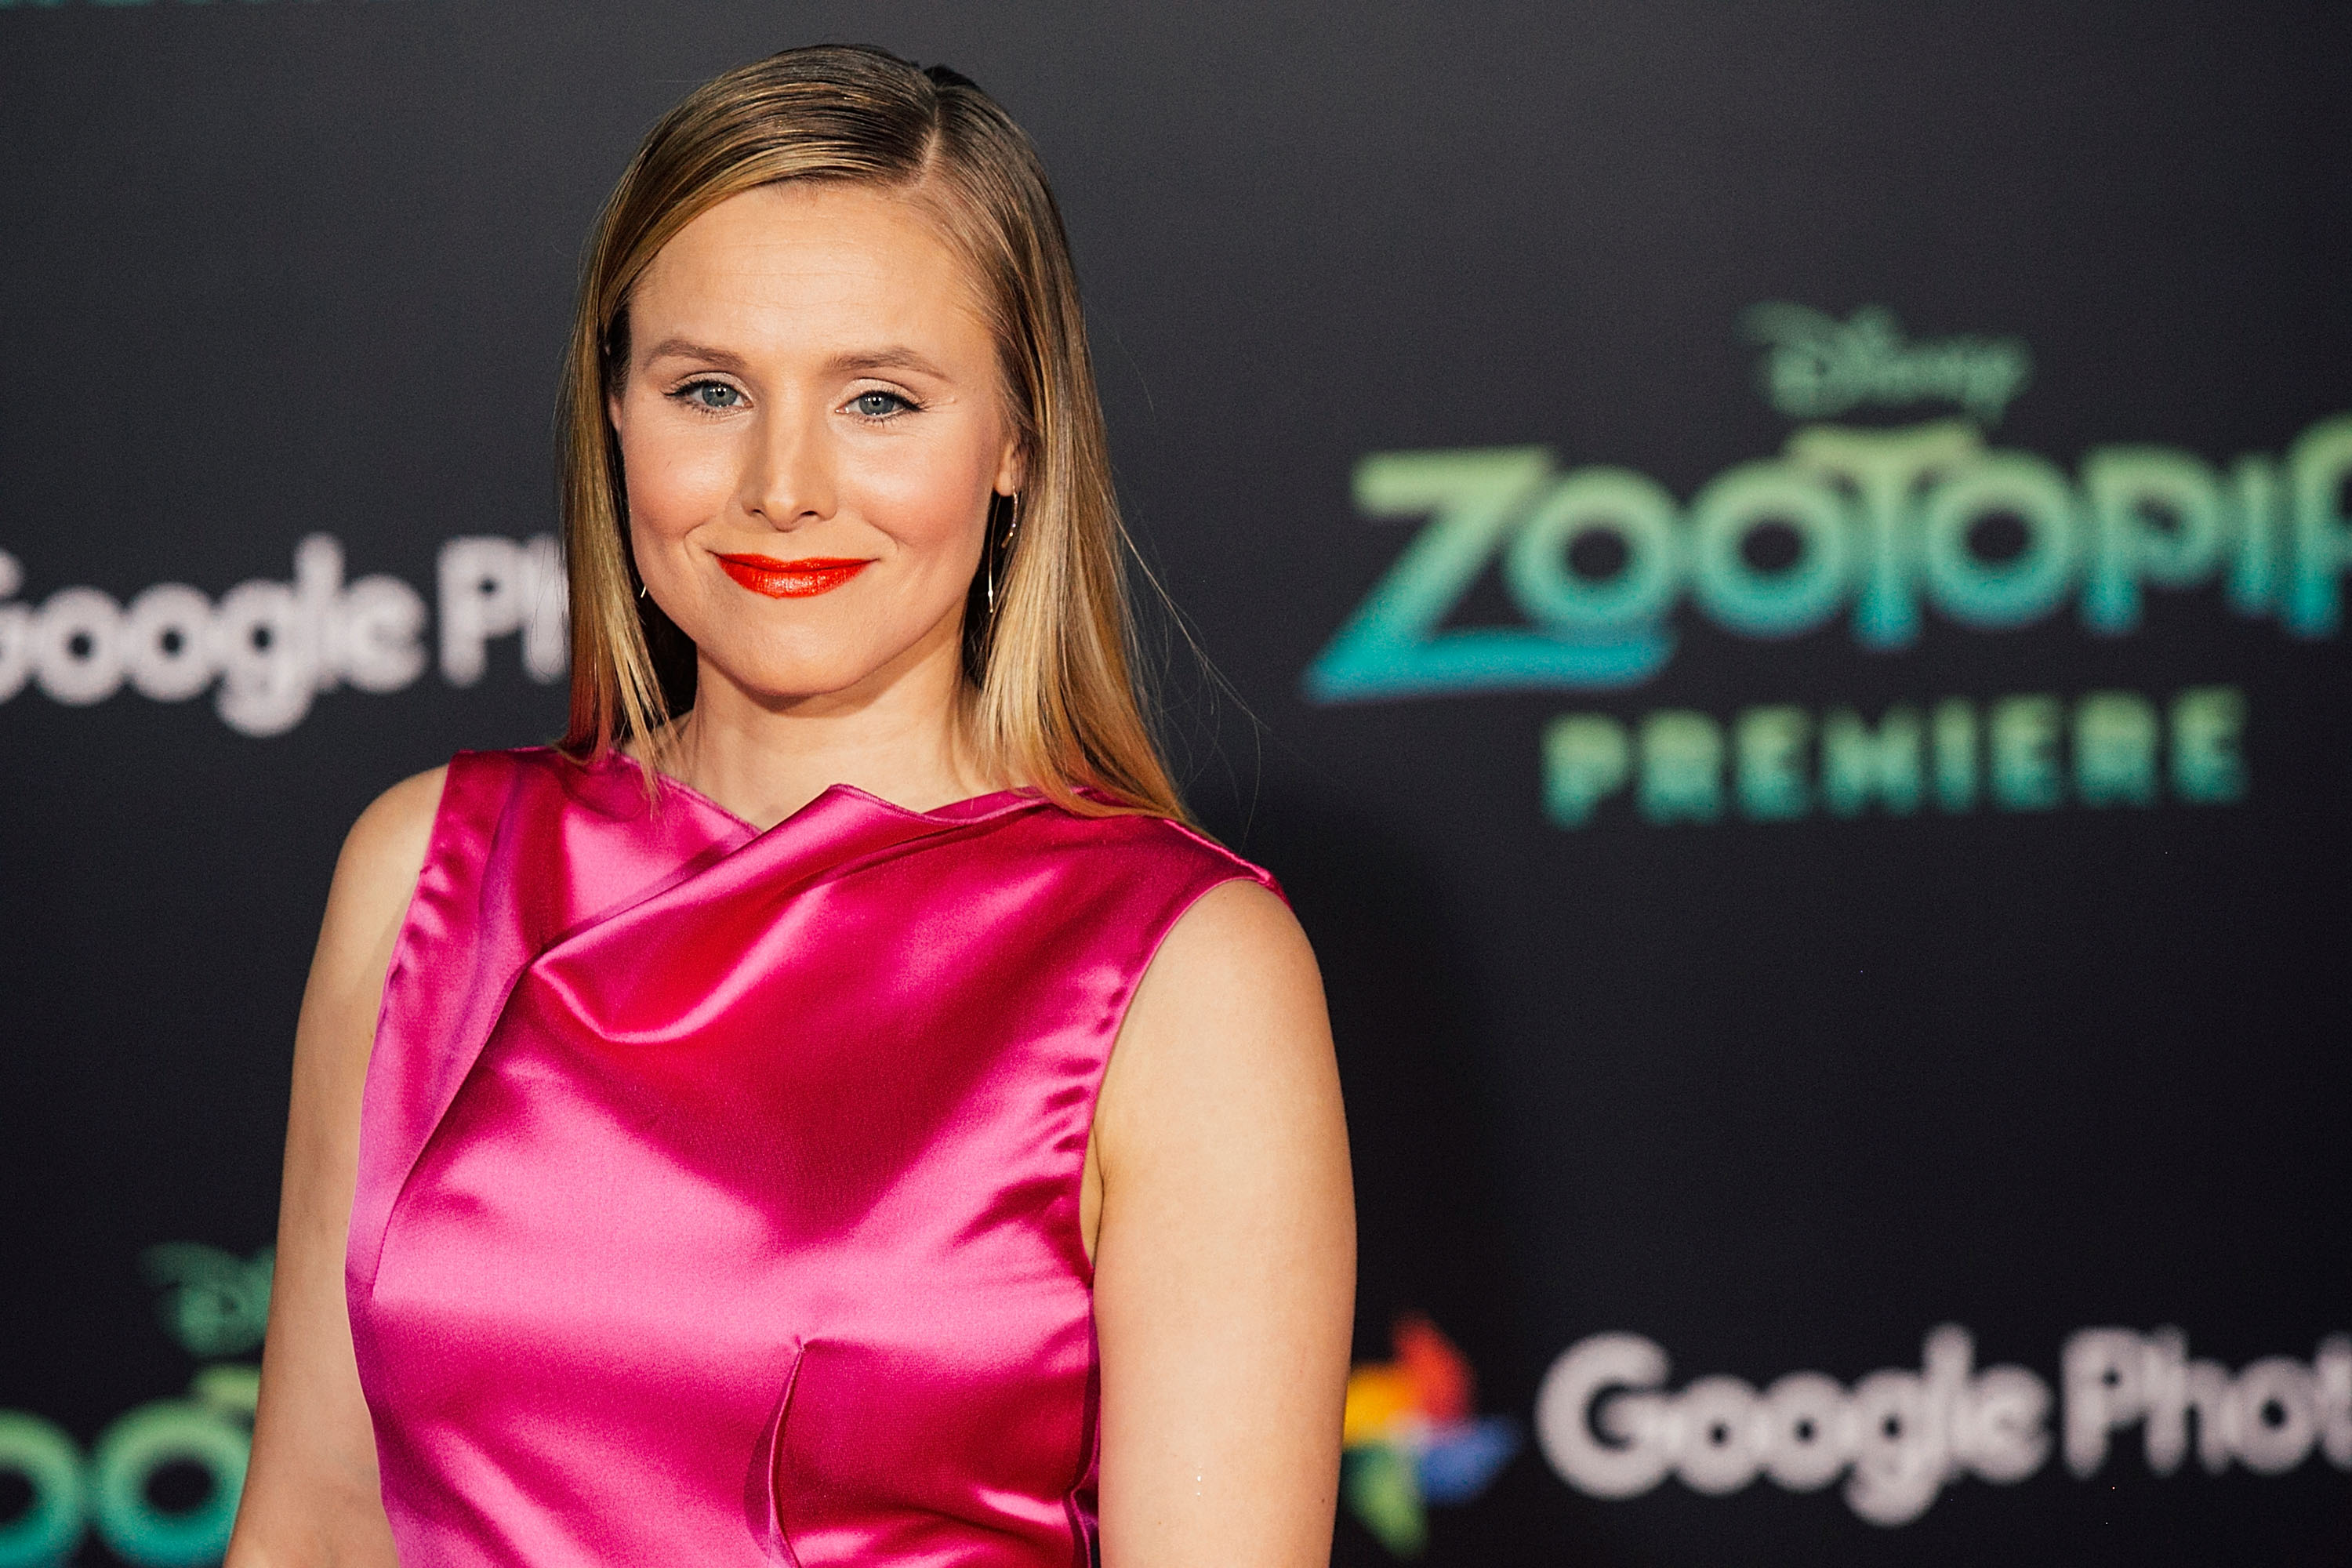 Kristen Bell arrives for the premiere of Walt Disney Animation Studios' "Zootopia" at the El Capitan Theatre on February 17, 2016 in Hollywood, California. (Gabriel Olsen—Getty Images)